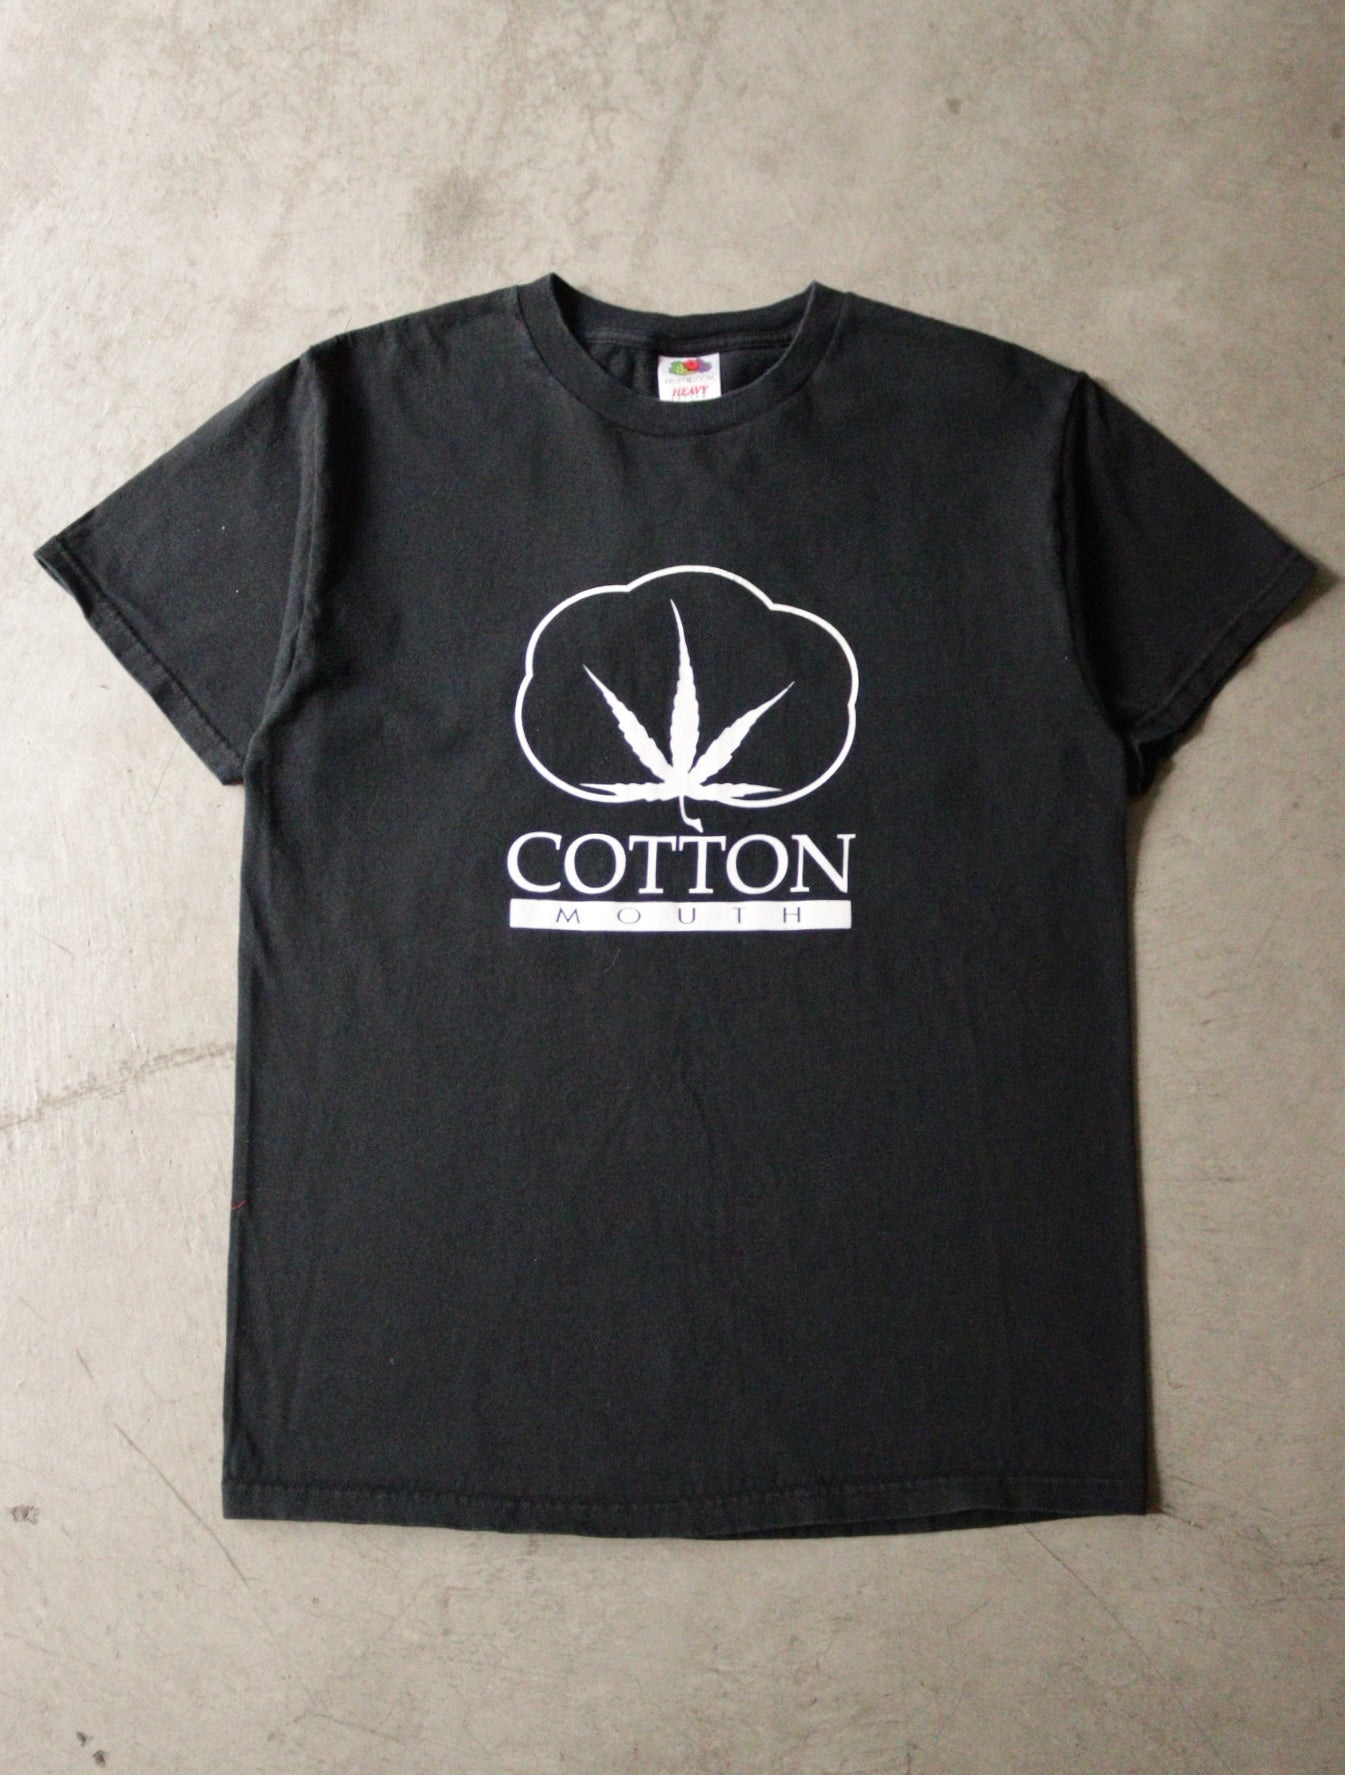 2000S COTTON MOUTH TEE